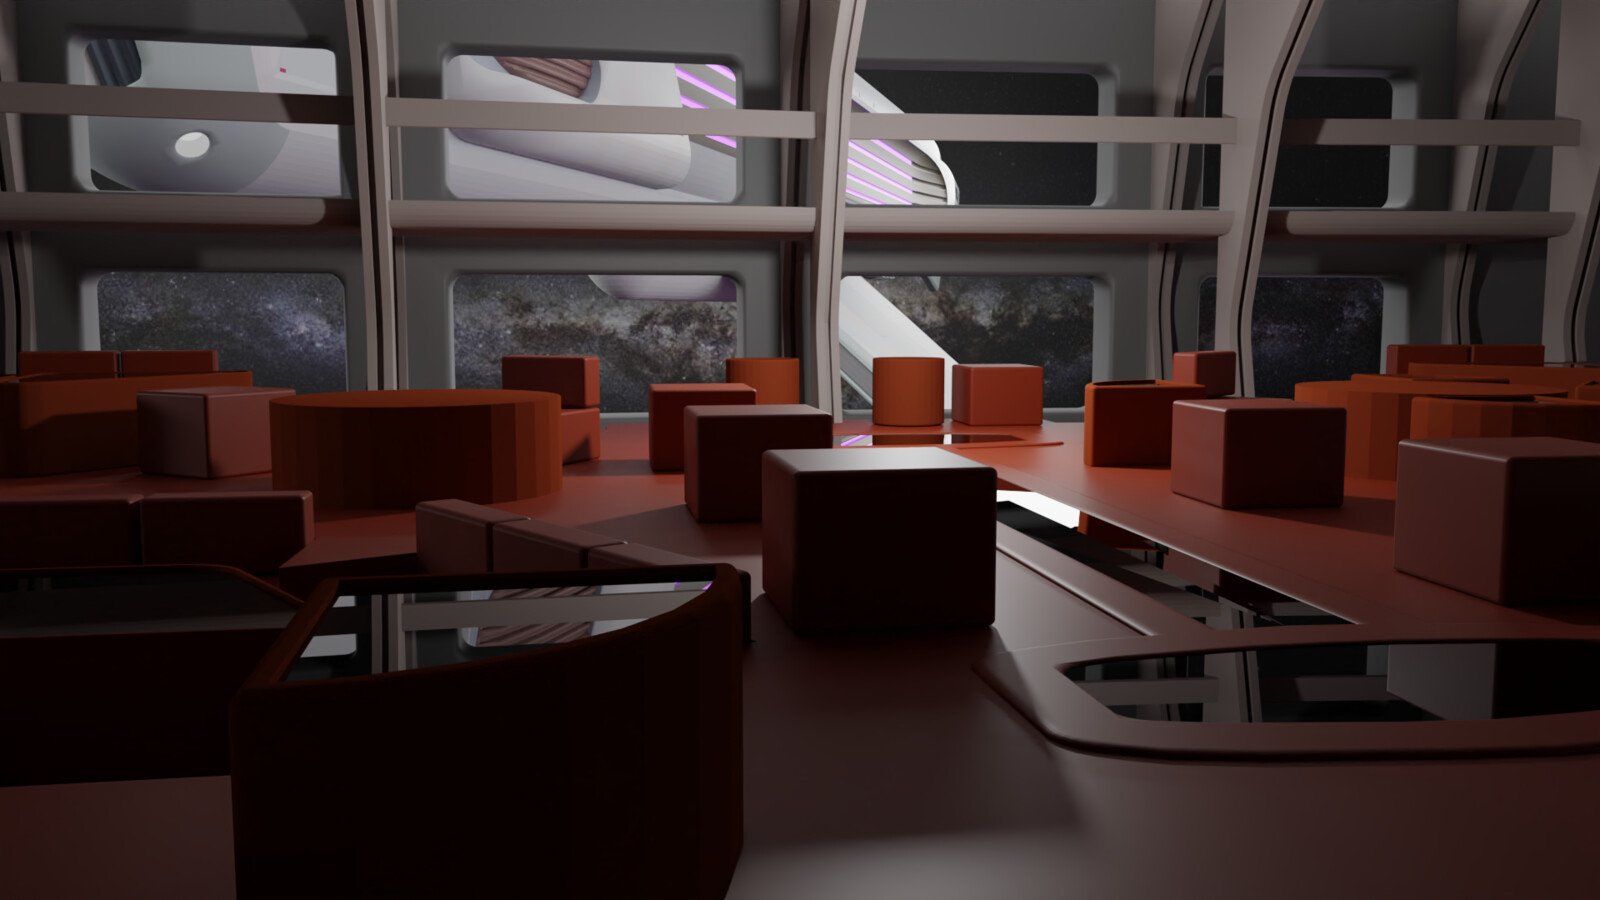 Here is another test render with the correct enterprise visible outside the windows.